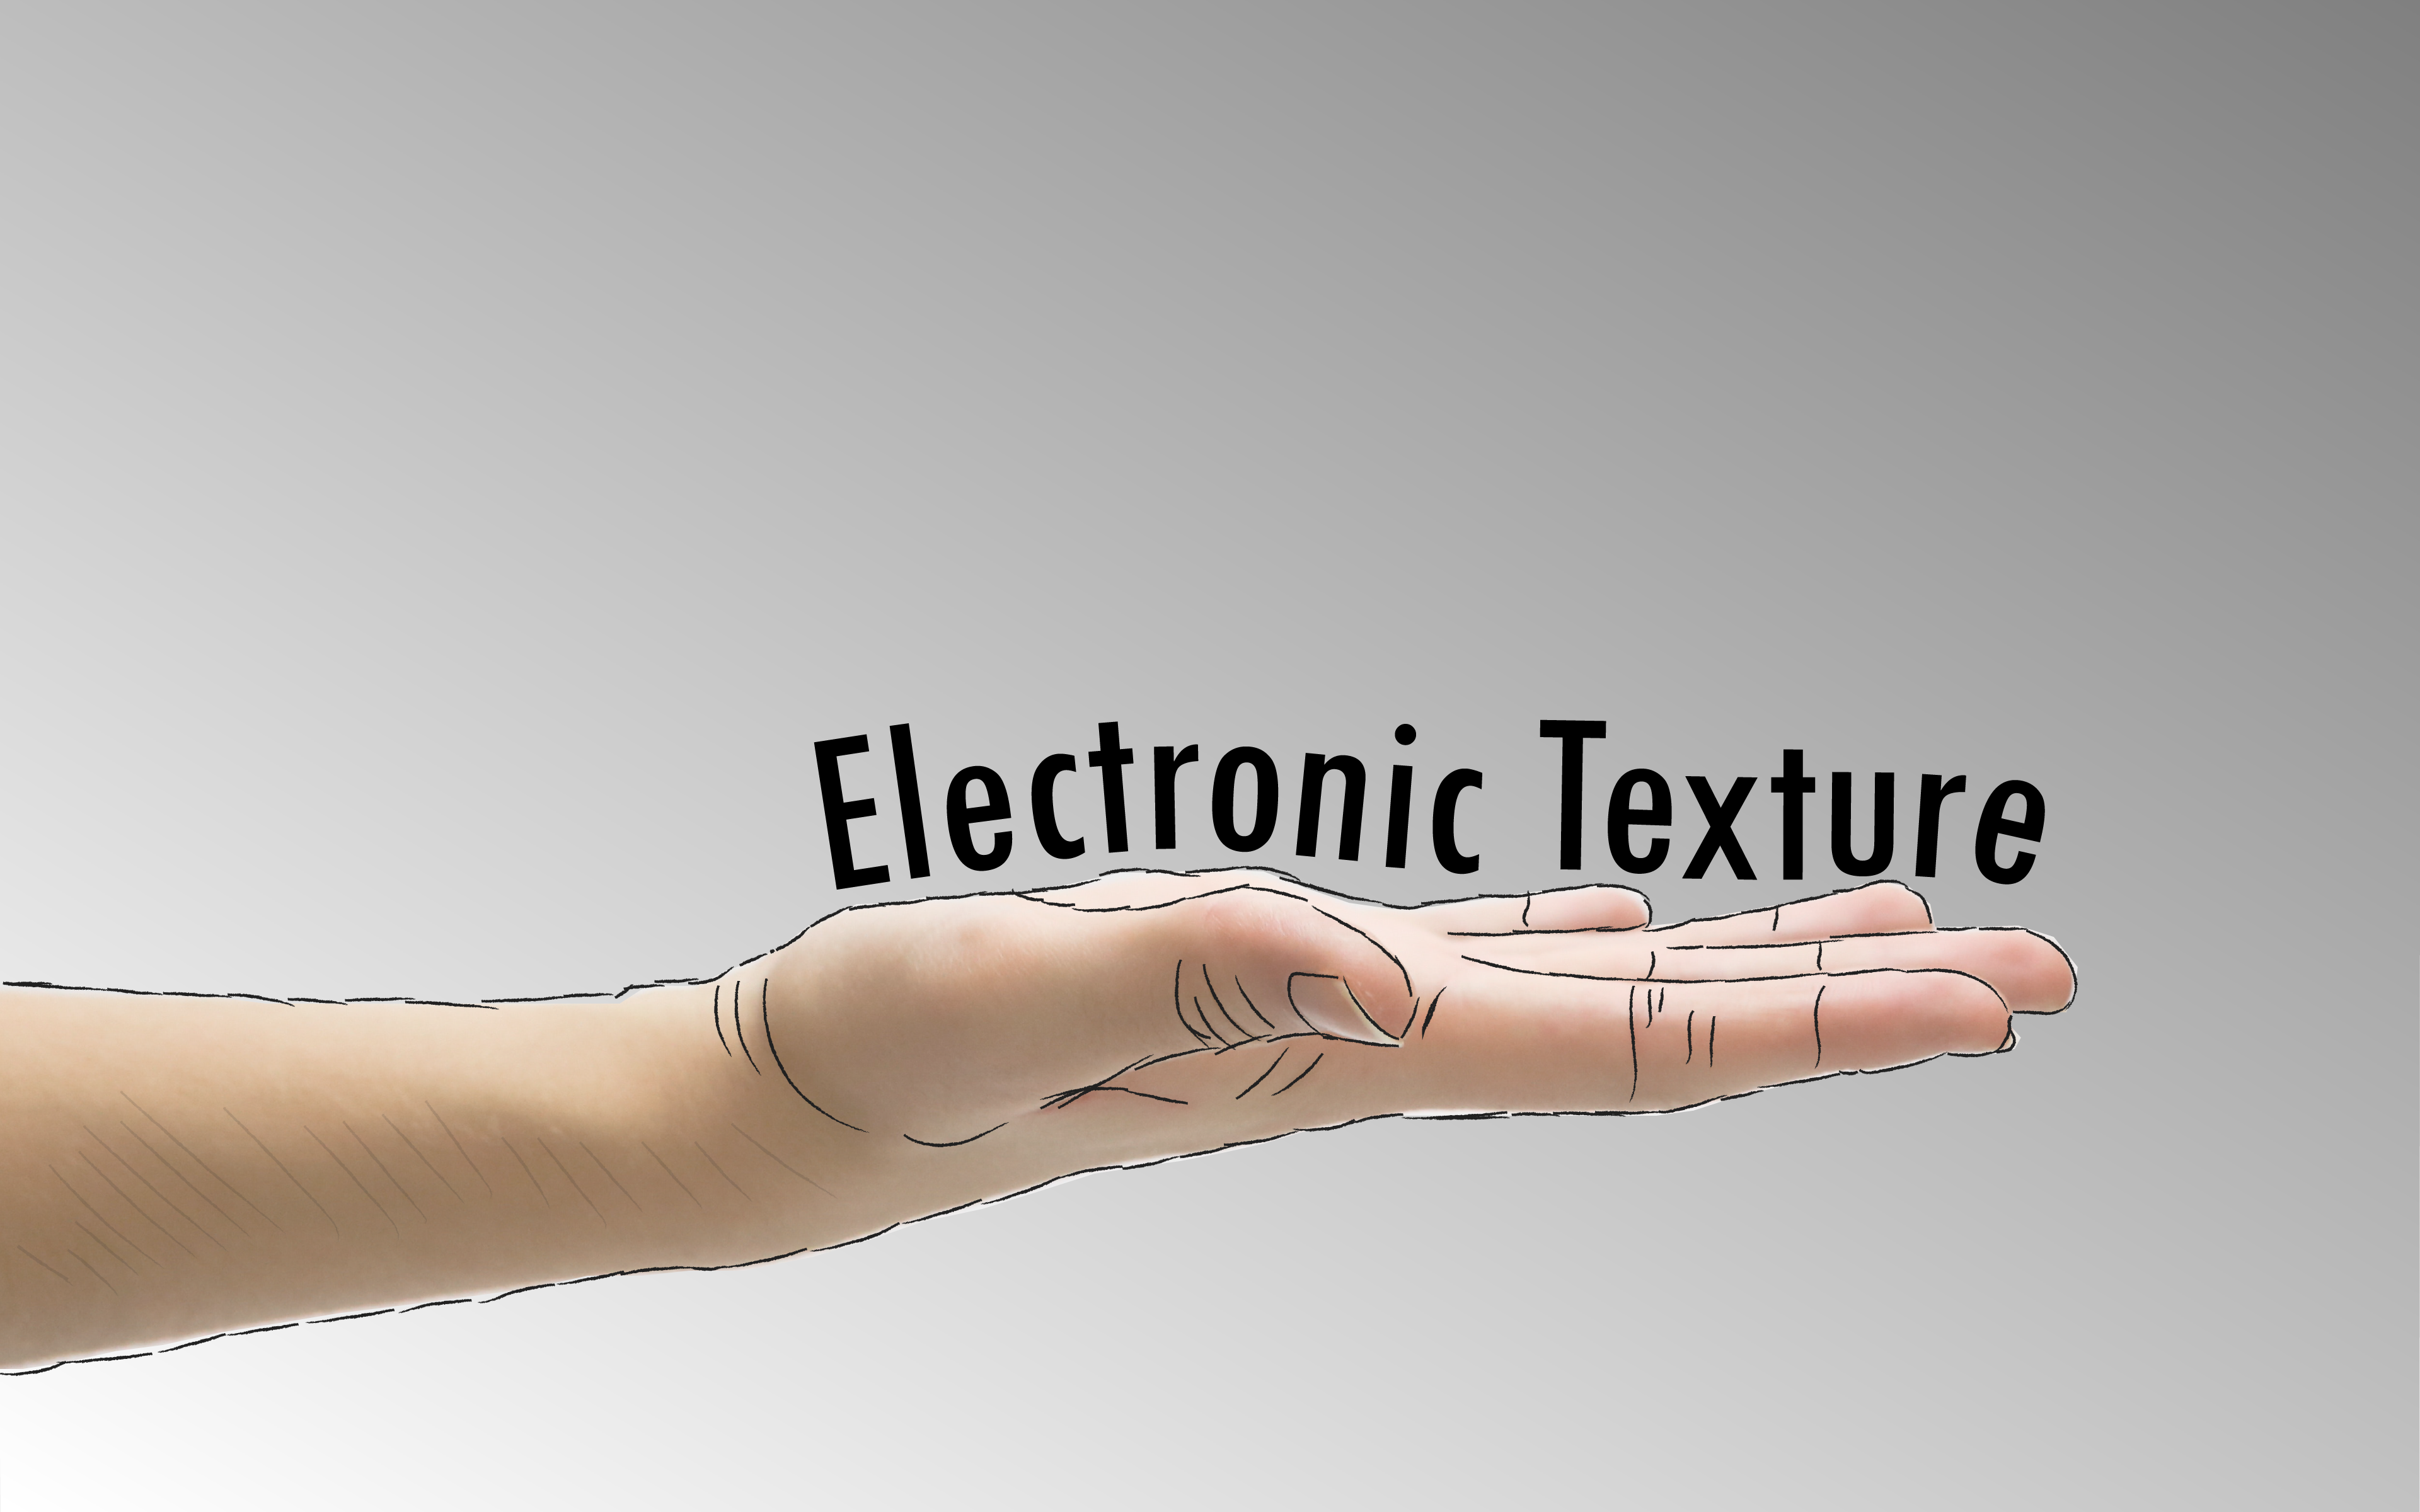 Electronic Texture